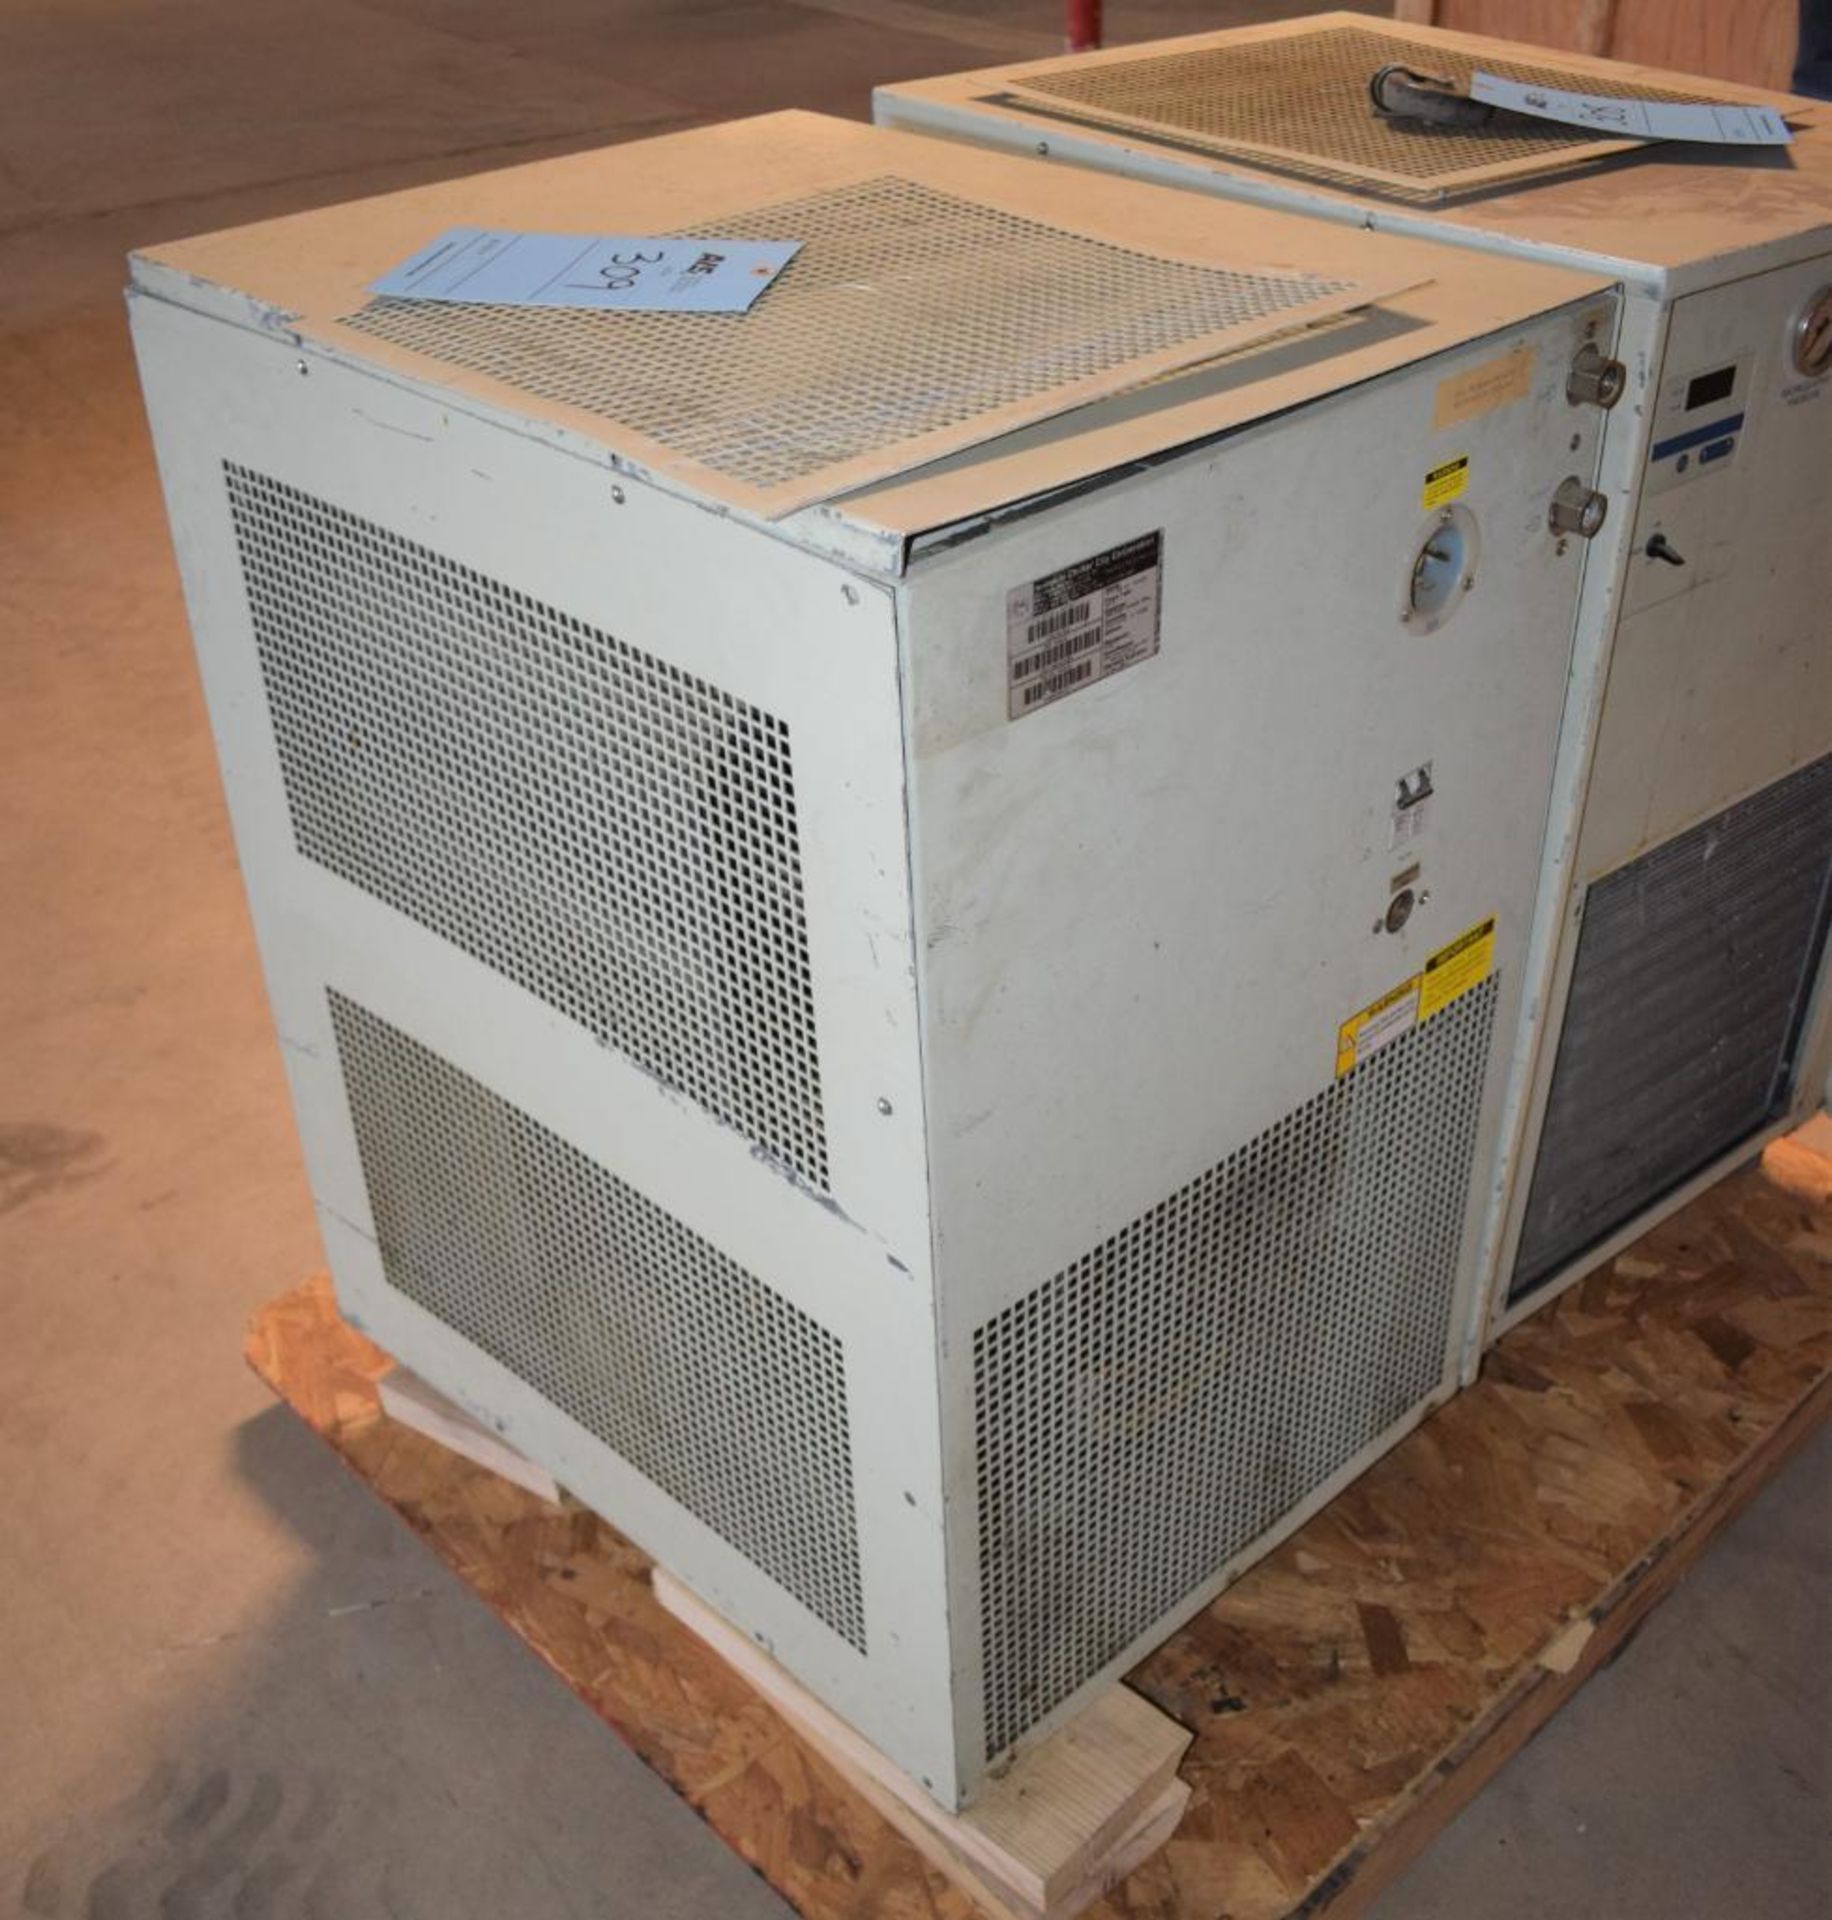 Thermo Neslab Recirculating Chiller, Model CFT-150. Approximate operating temperature range +5 to +3 - Image 2 of 4